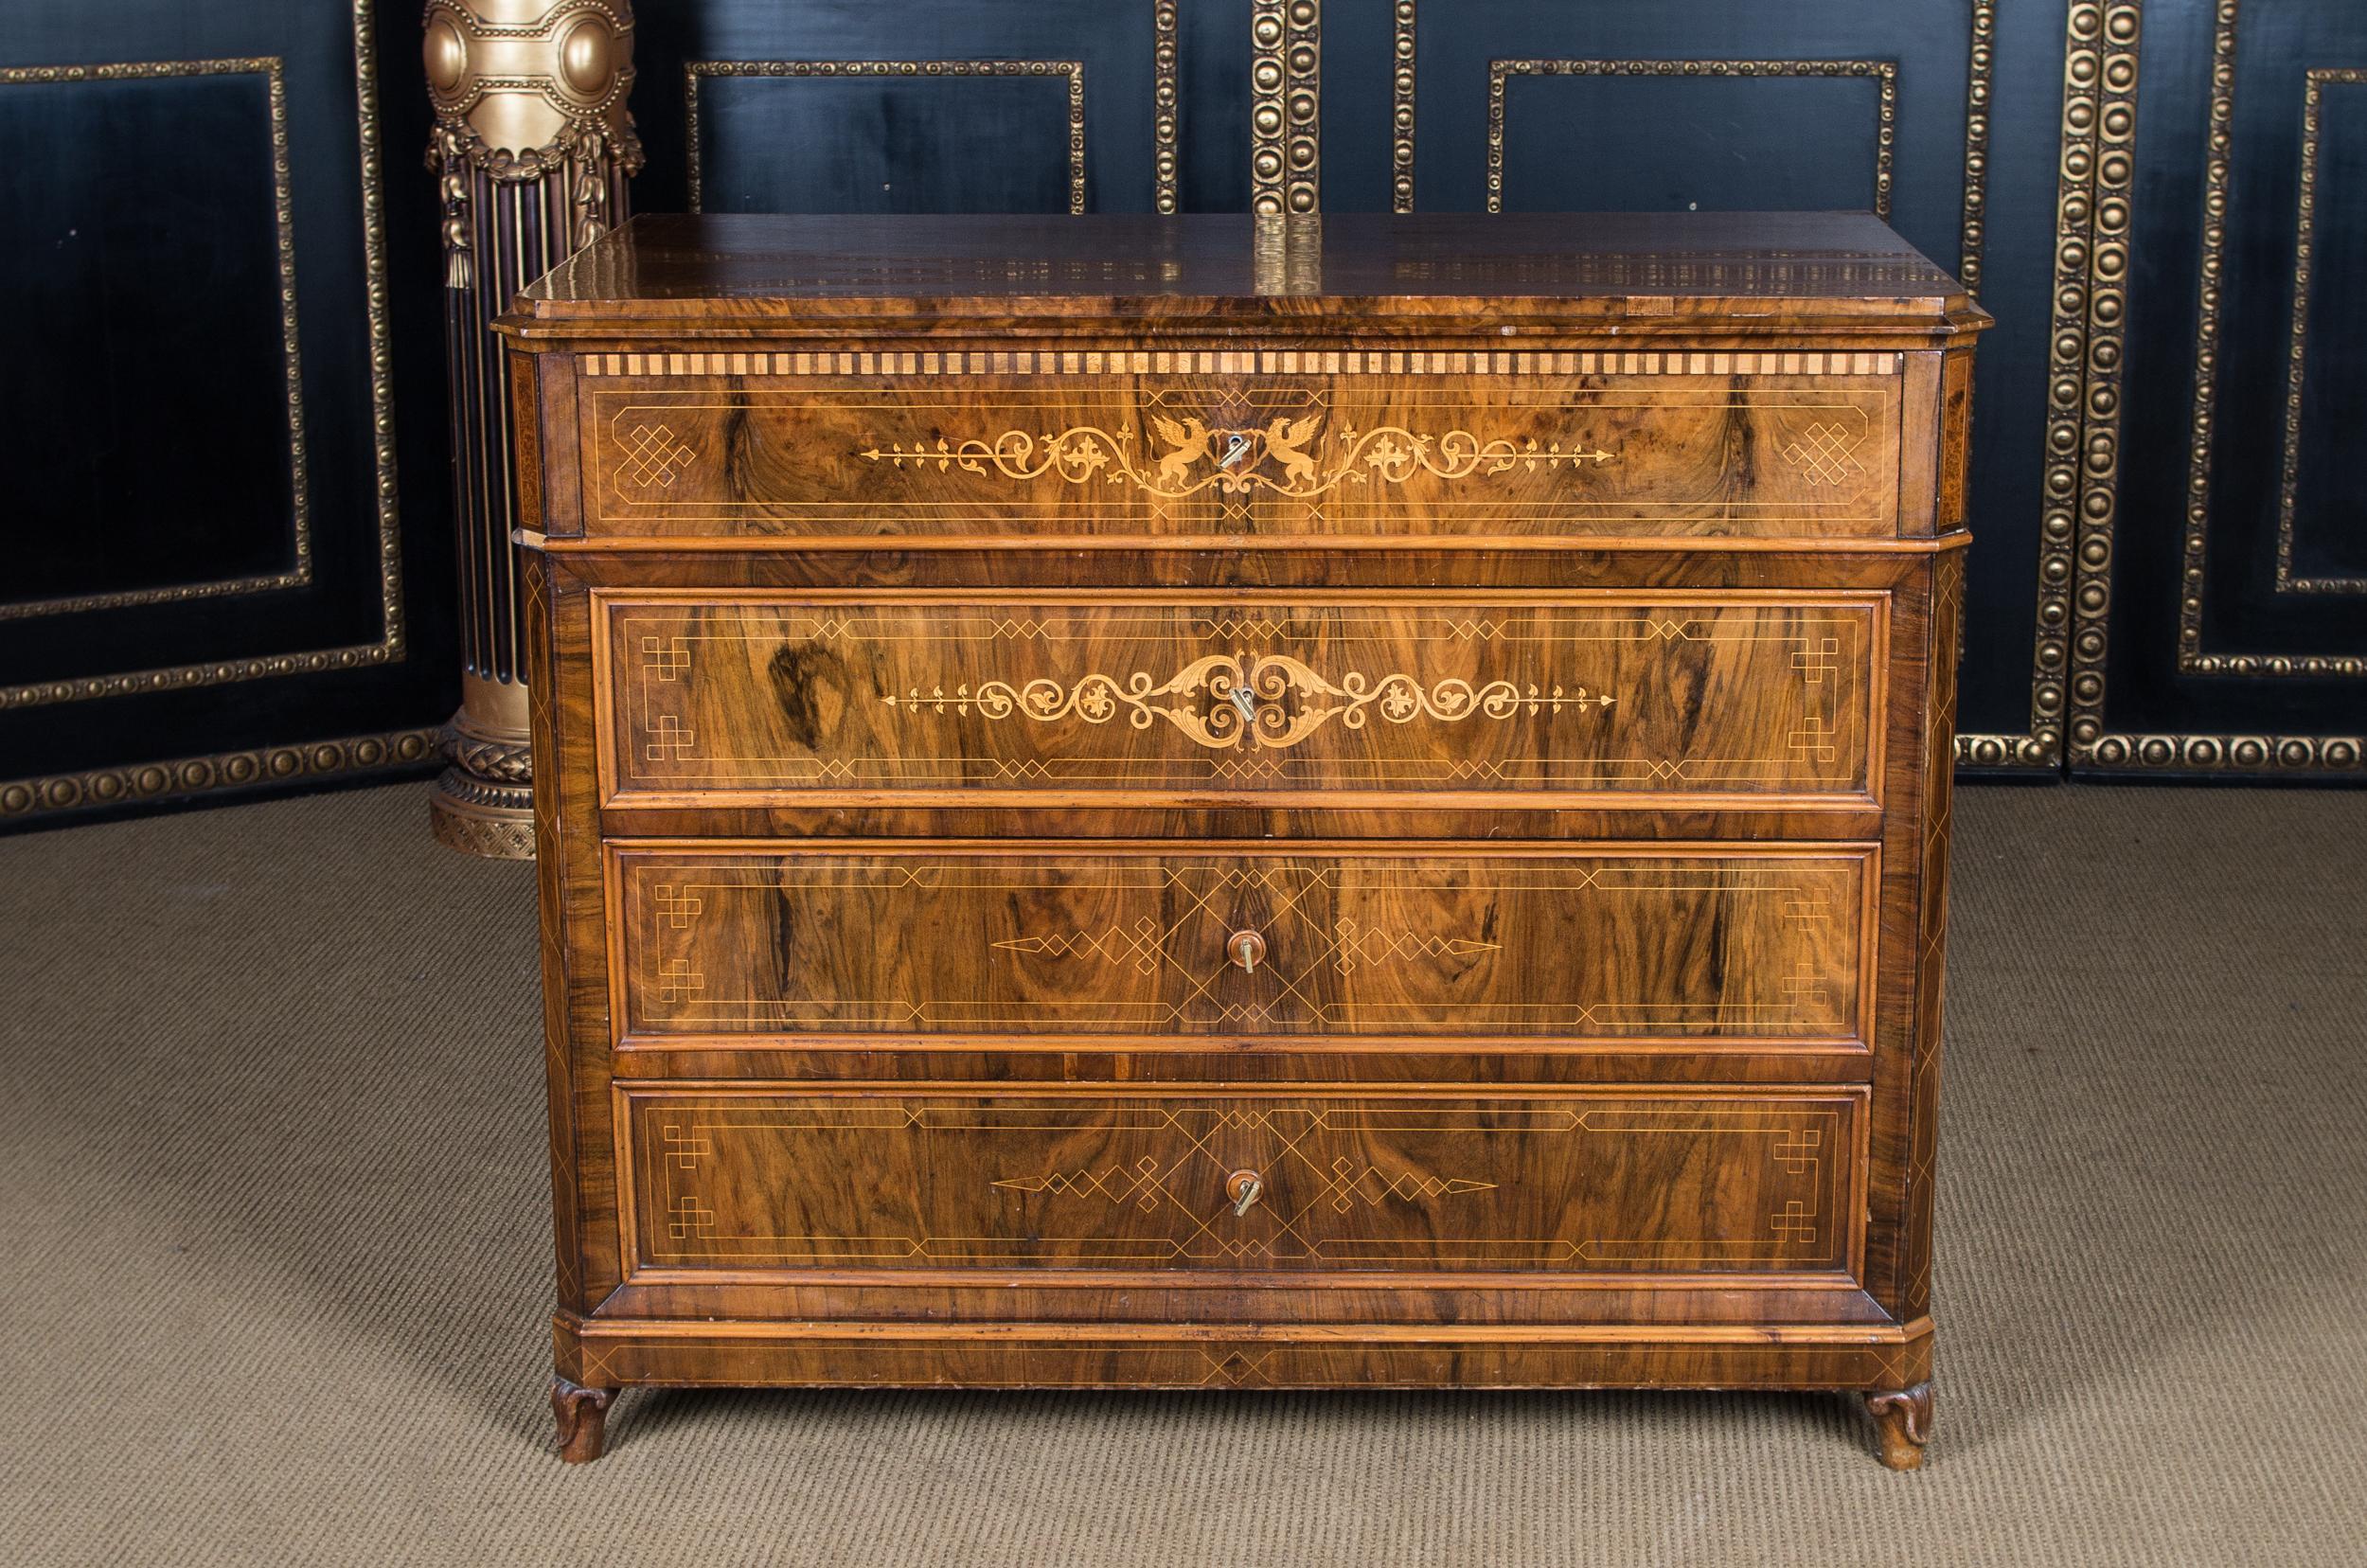 Inlaid Biedermeier writing commode with drawers circa 1850 with writing tablet

Walnut on solid wood. On short curved legs straight four-bladed corpus.
4 drawers with fine inlays processed.
The upper drawer is equipped with folding mechanism for